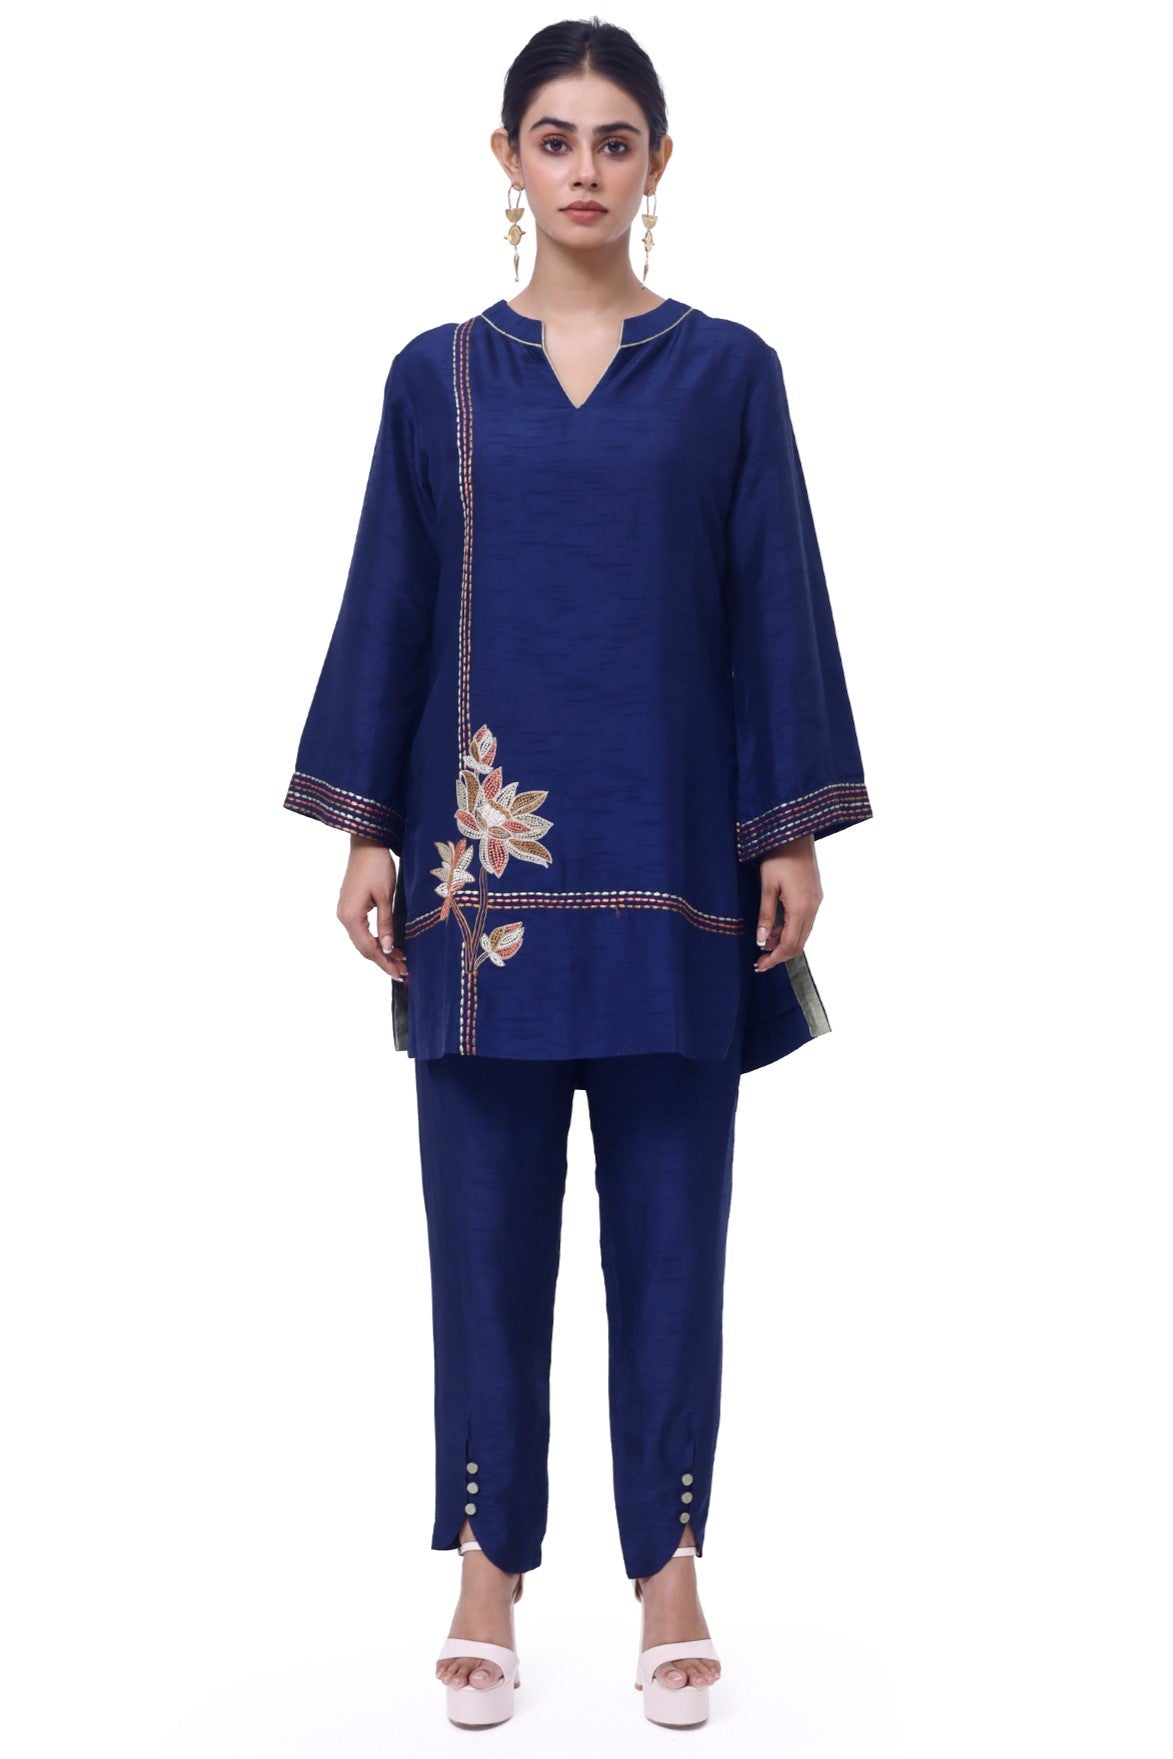 Shop elegant navy blue Mysore silk pant set online in USA. Shop the best and latest designs in embroidered sarees, designer sarees, Anarkali suit, lehengas, sharara suits for weddings and special occasions from Pure Elegance Indian fashion store in USA.-full view